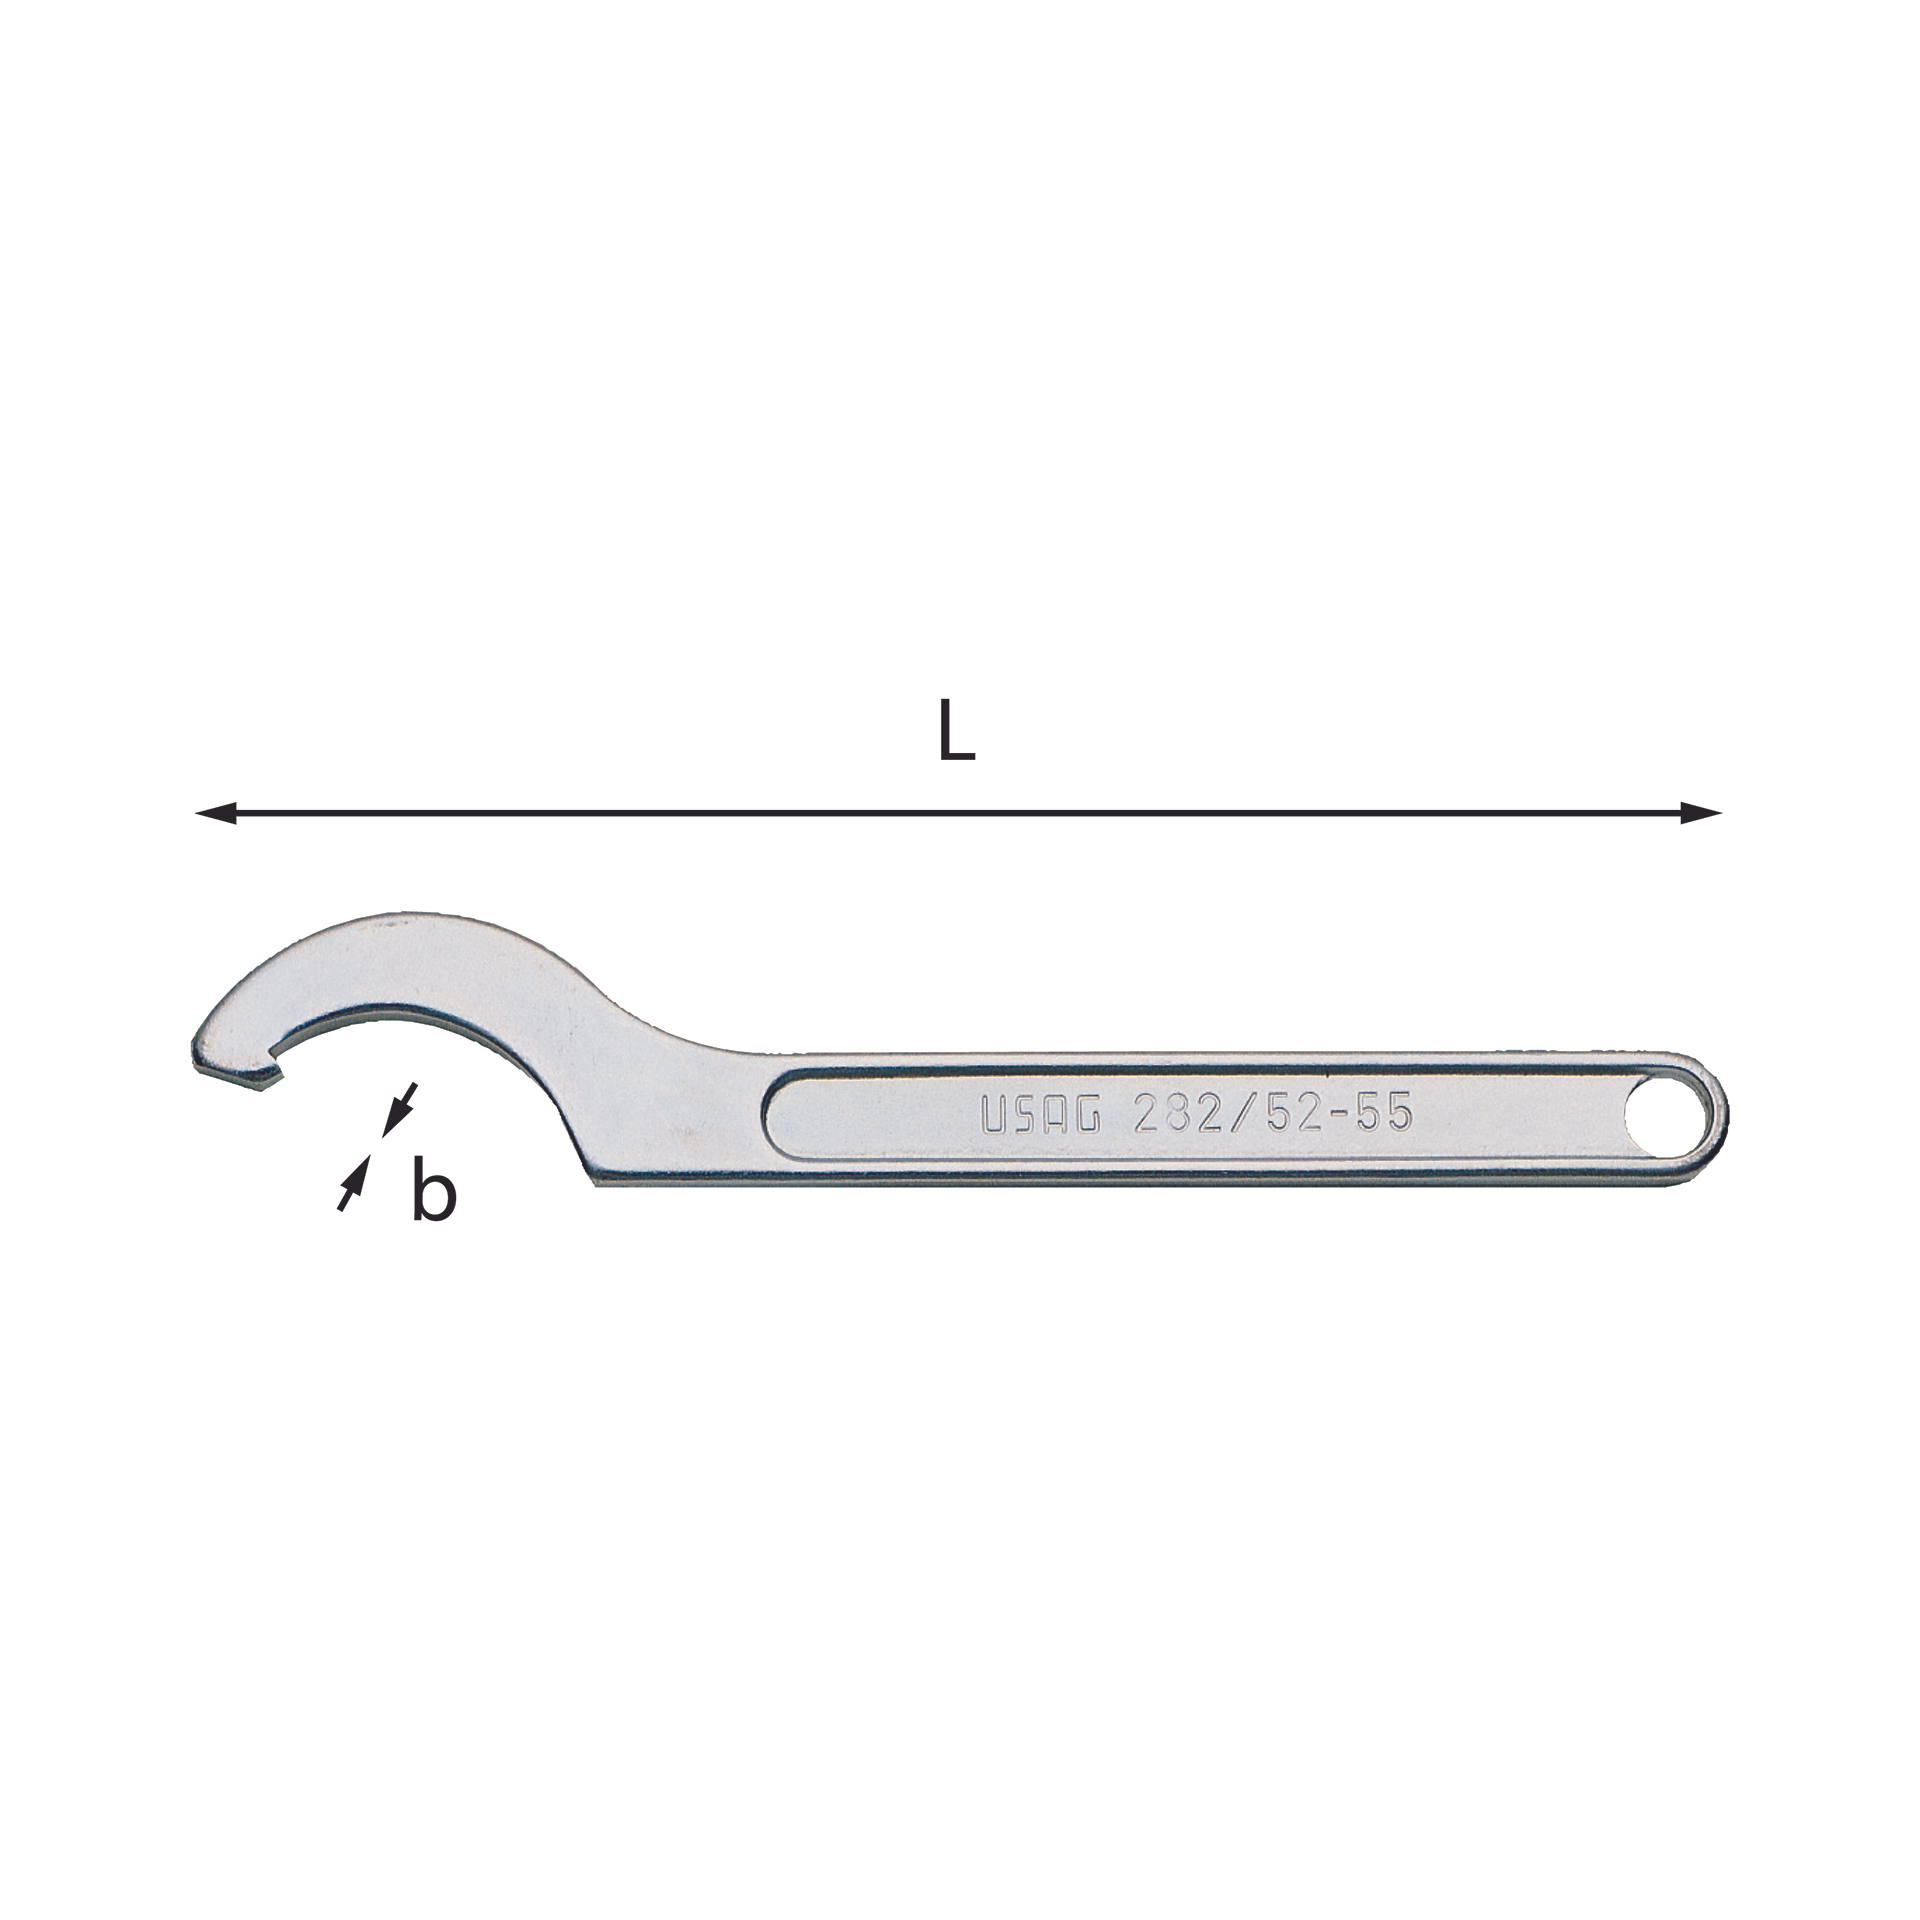 Hook wrenches with square pin for ring nuts - Usag 282